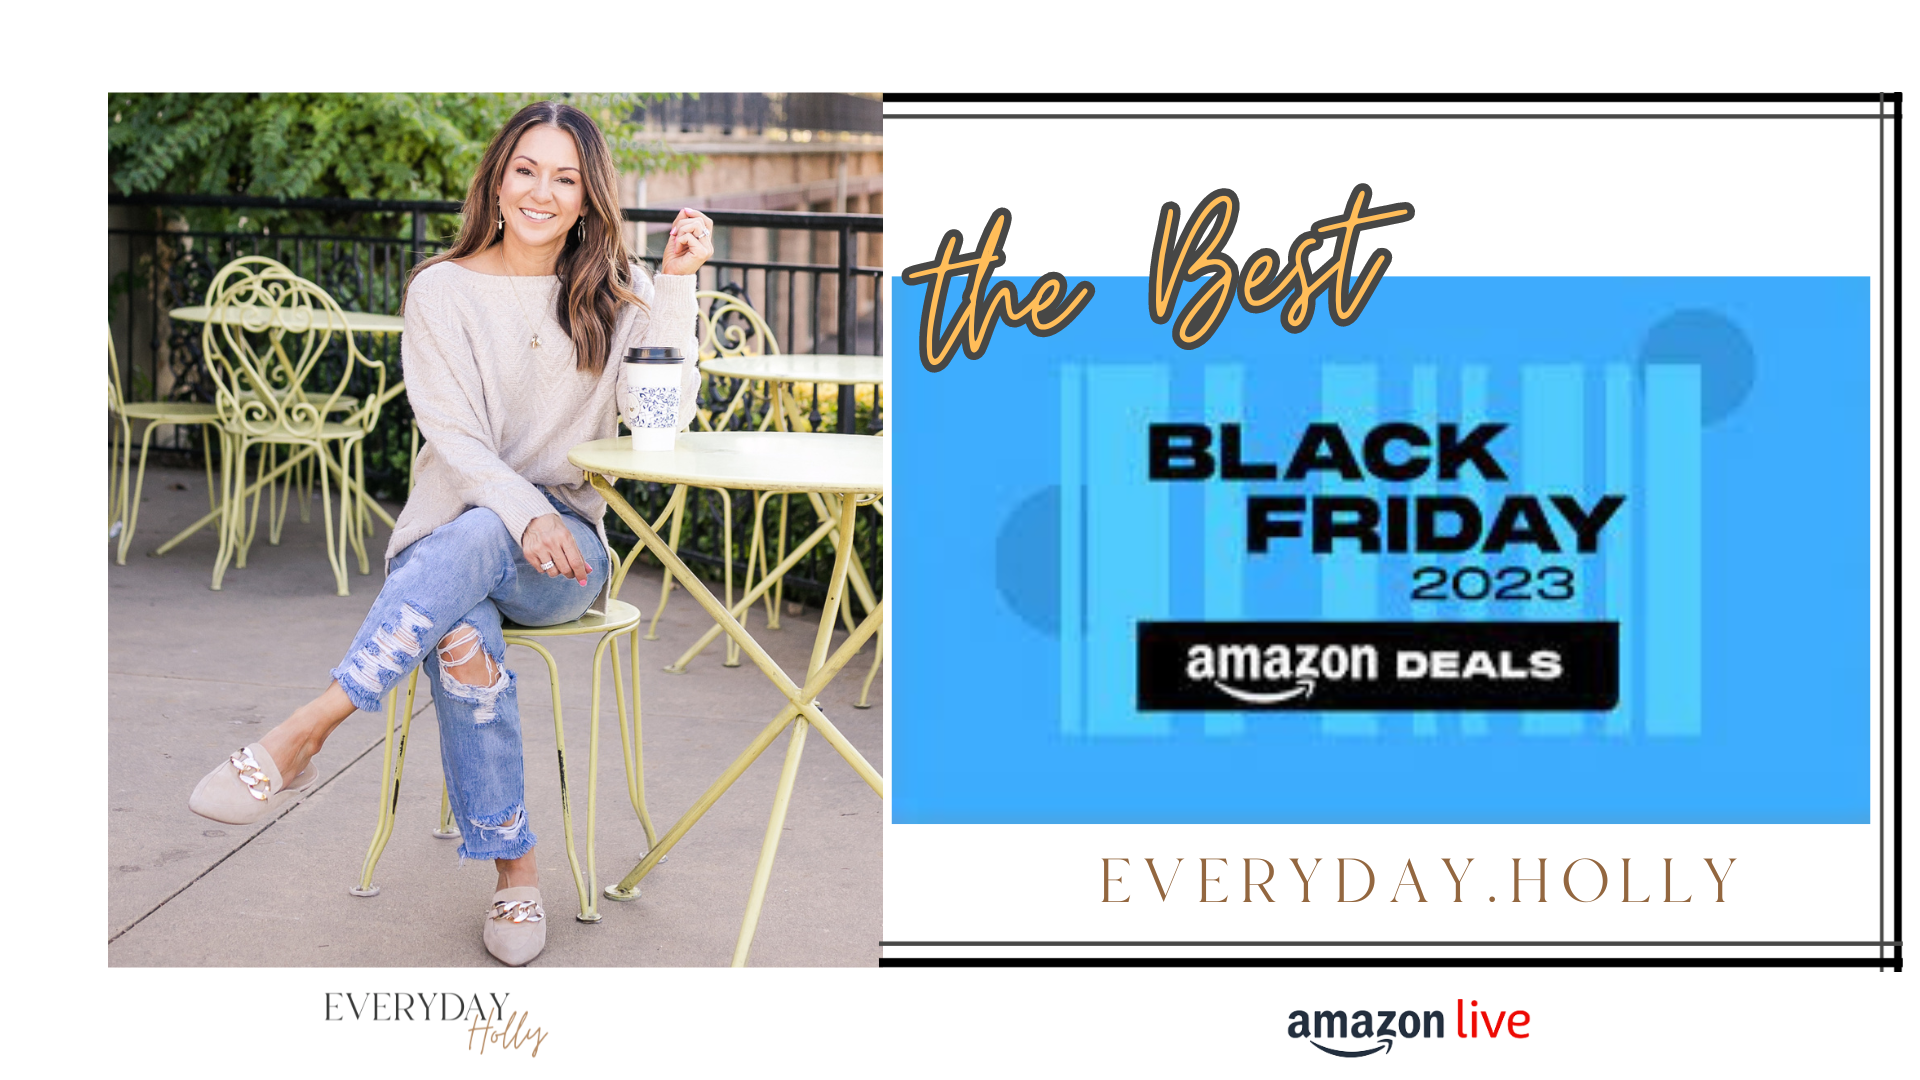 shop early black friday deals now | #shop #blackfriday #deals #earlyblackfriday #shopping #gifts #amazonlive